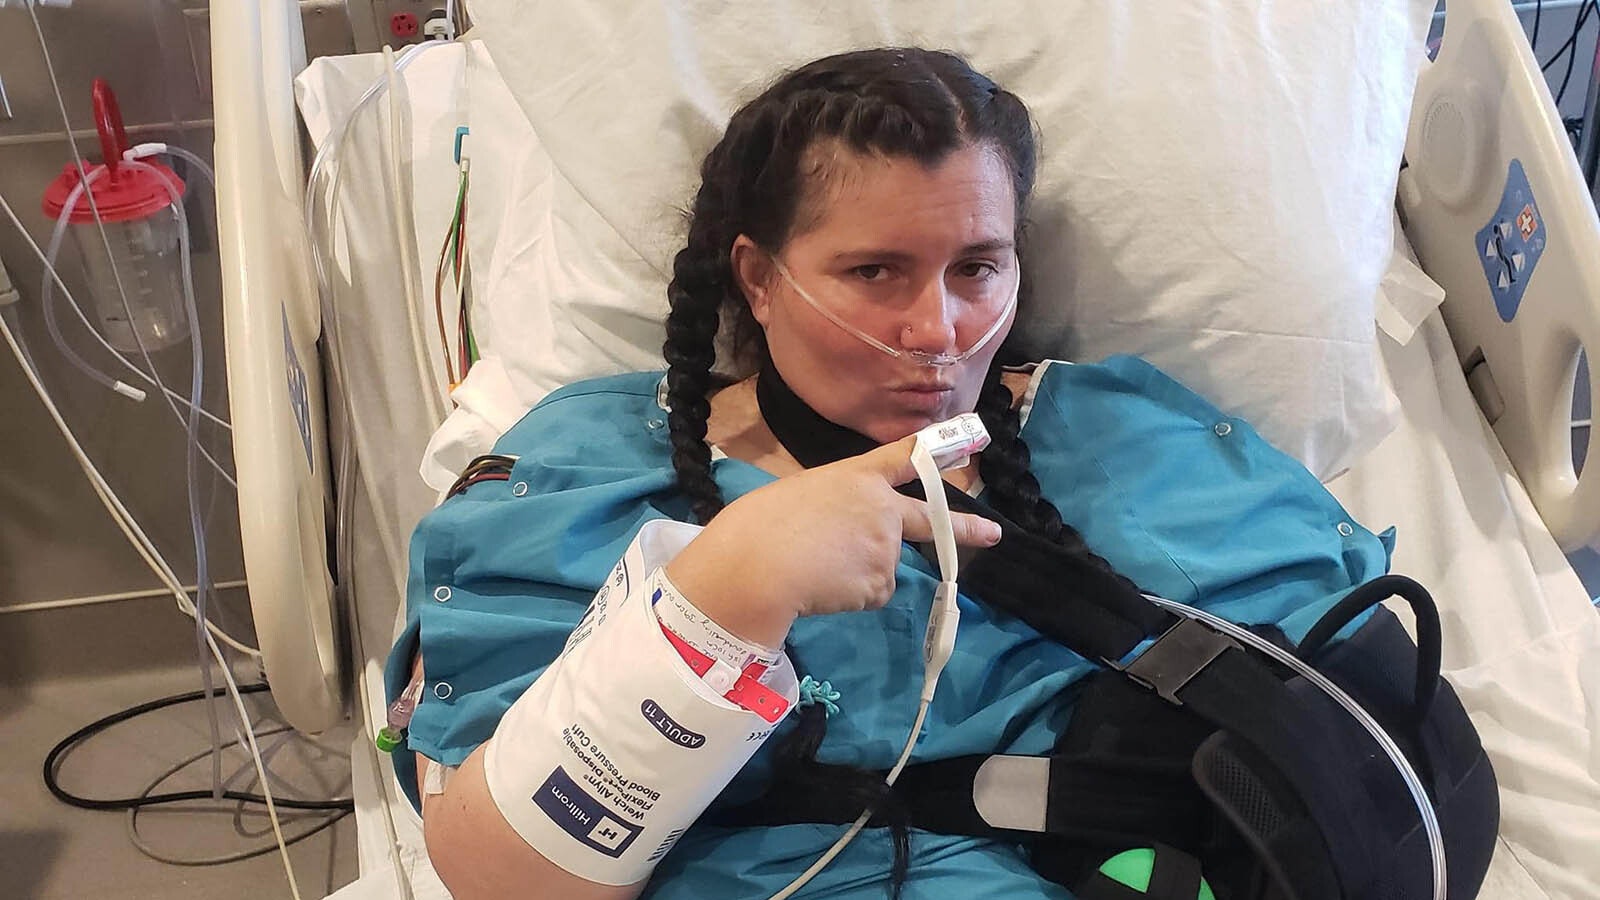 Karen Smith is recovering after she was stabbed in the back last month. The family is now raising money for her medical bills, while her teen son has been charged as an adult for allegedly stabbing her.